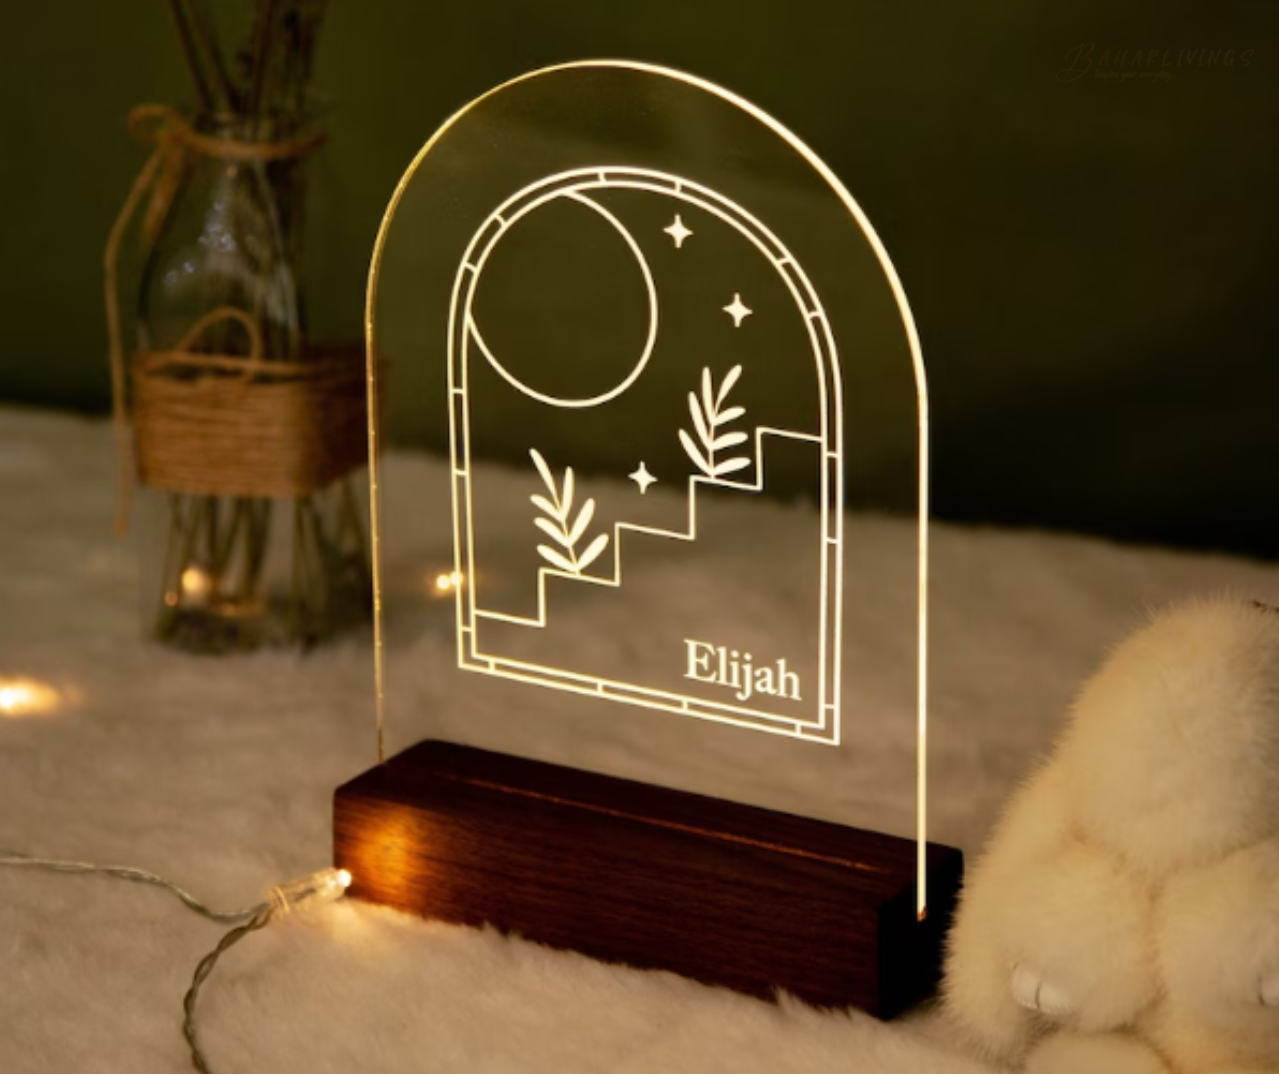 Personalized night light with wooden base and moon and star design.